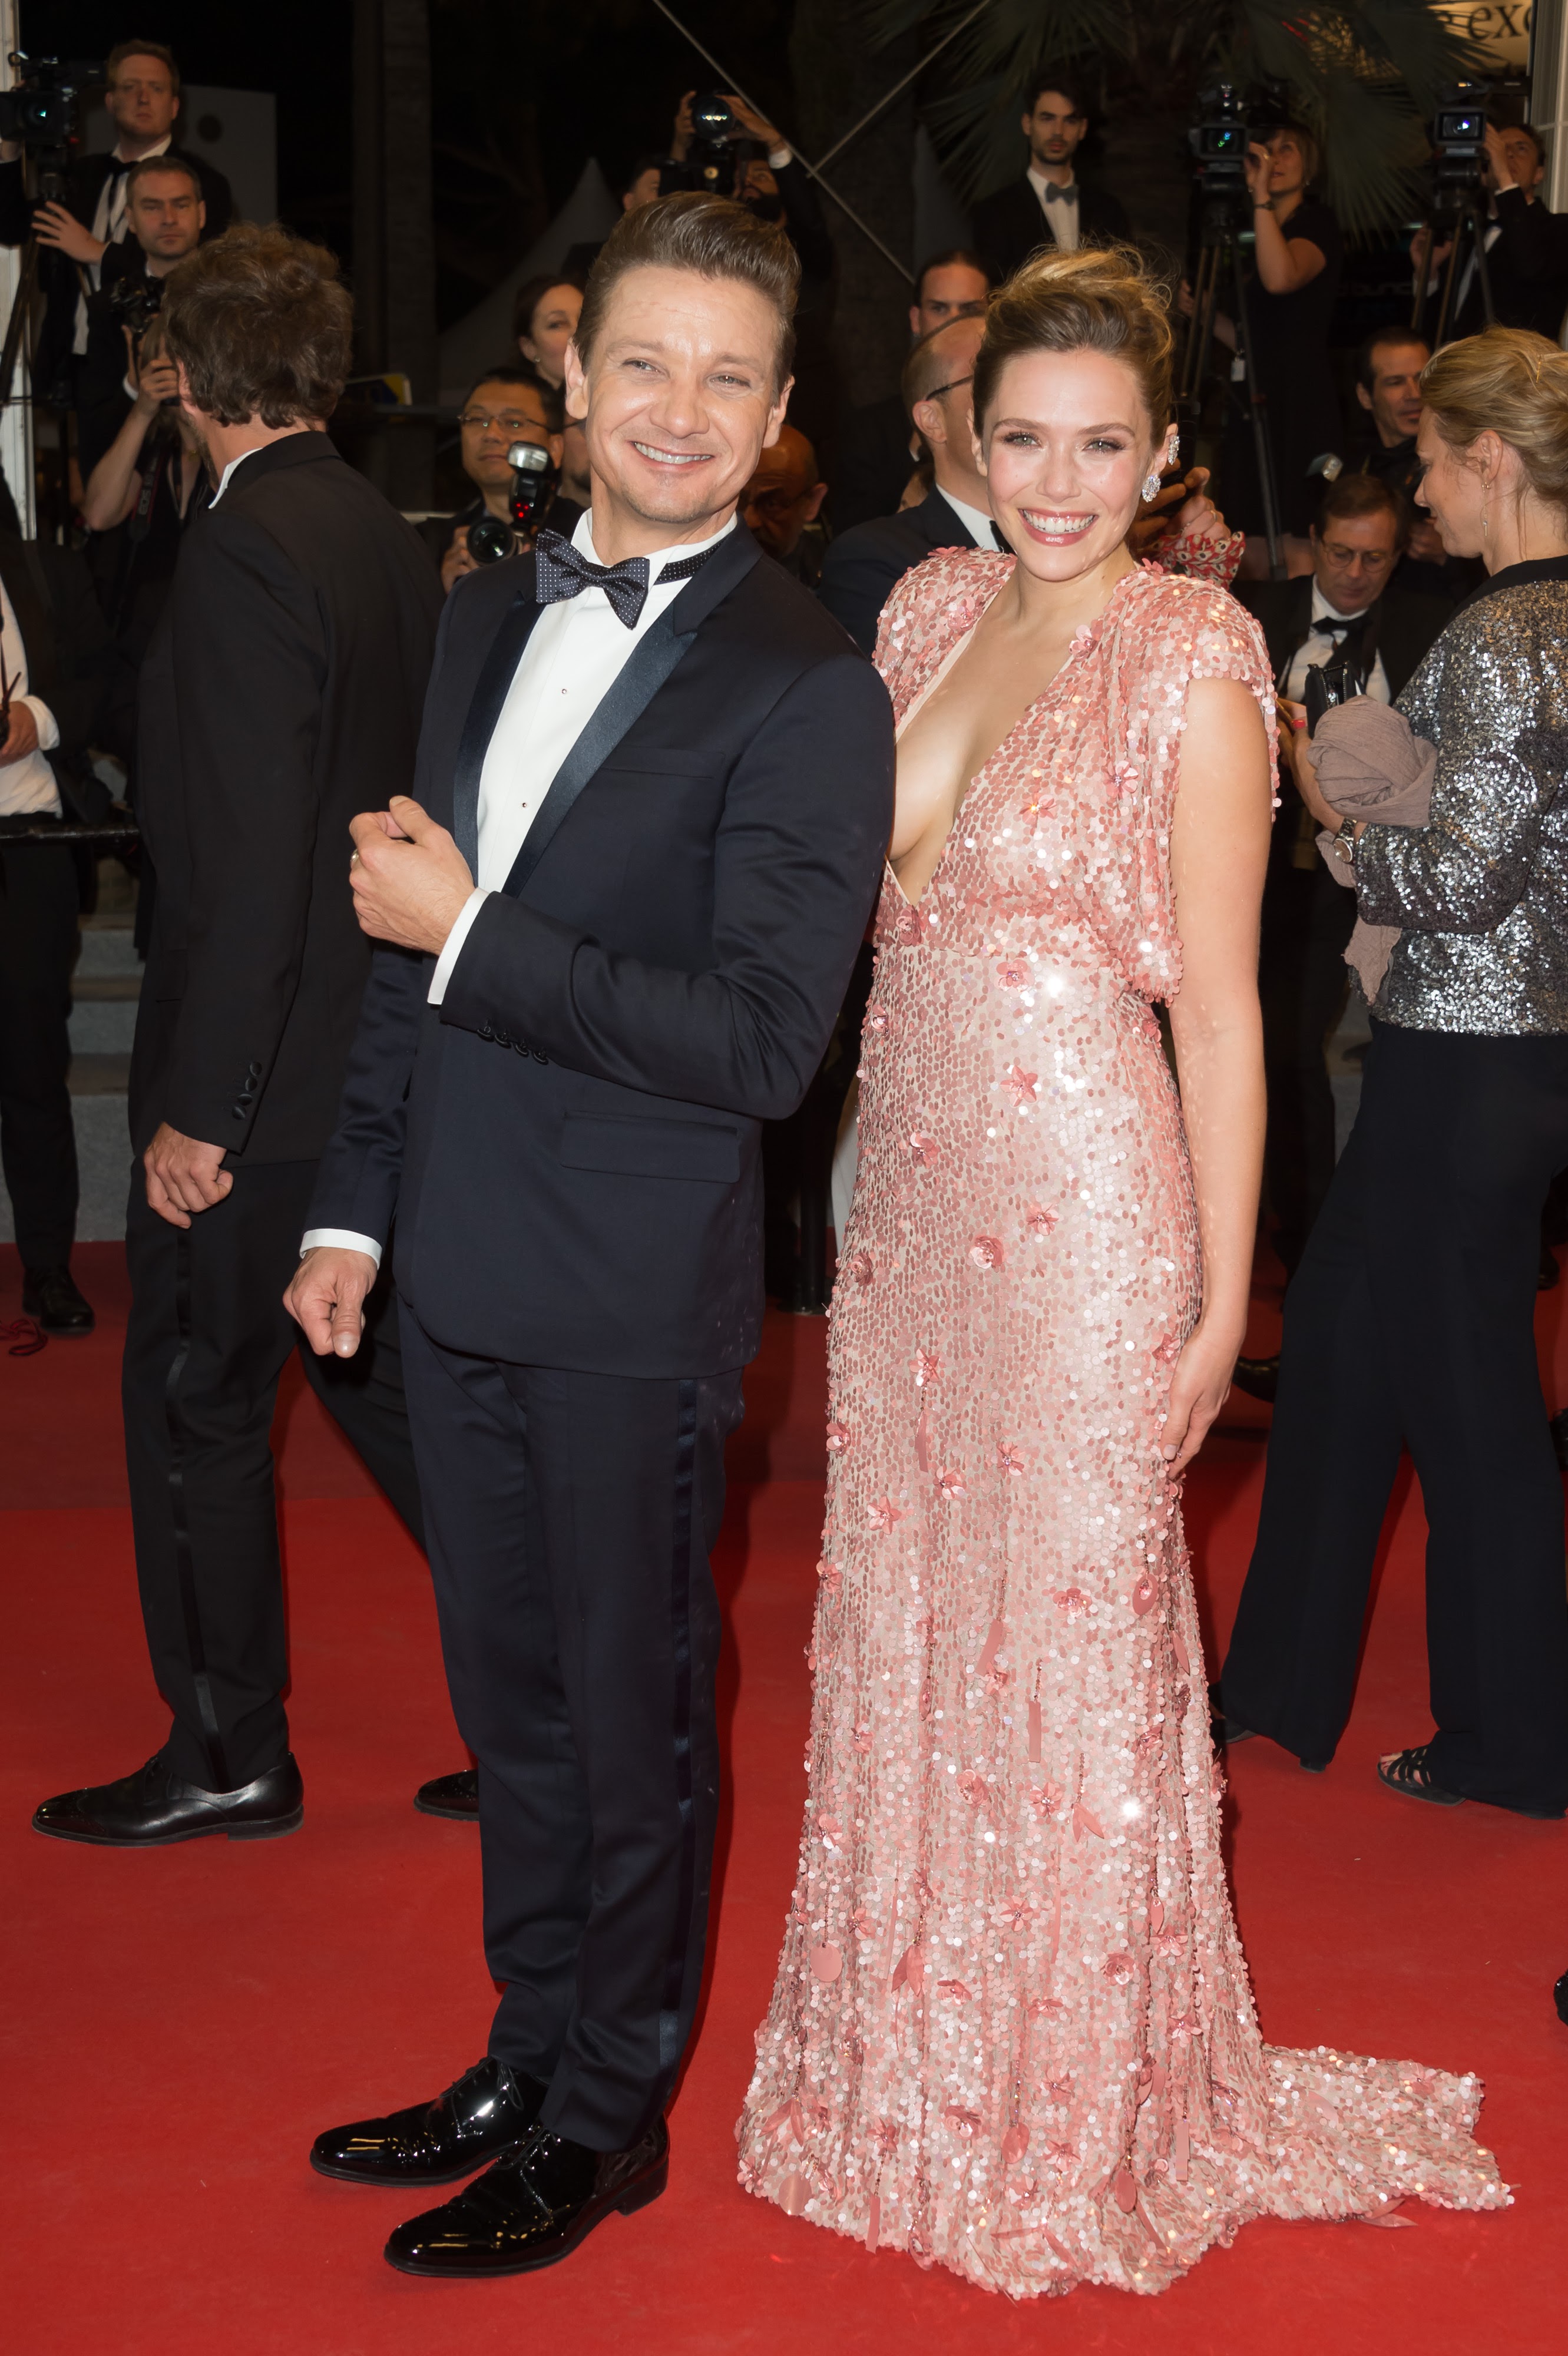 Elizabeth Olsen And Jeremy Renner At The 70th Cannes Film Festival 第70回カンヌ映画祭のエリザベス オルセンとジェレミー レナー Cia Movie News